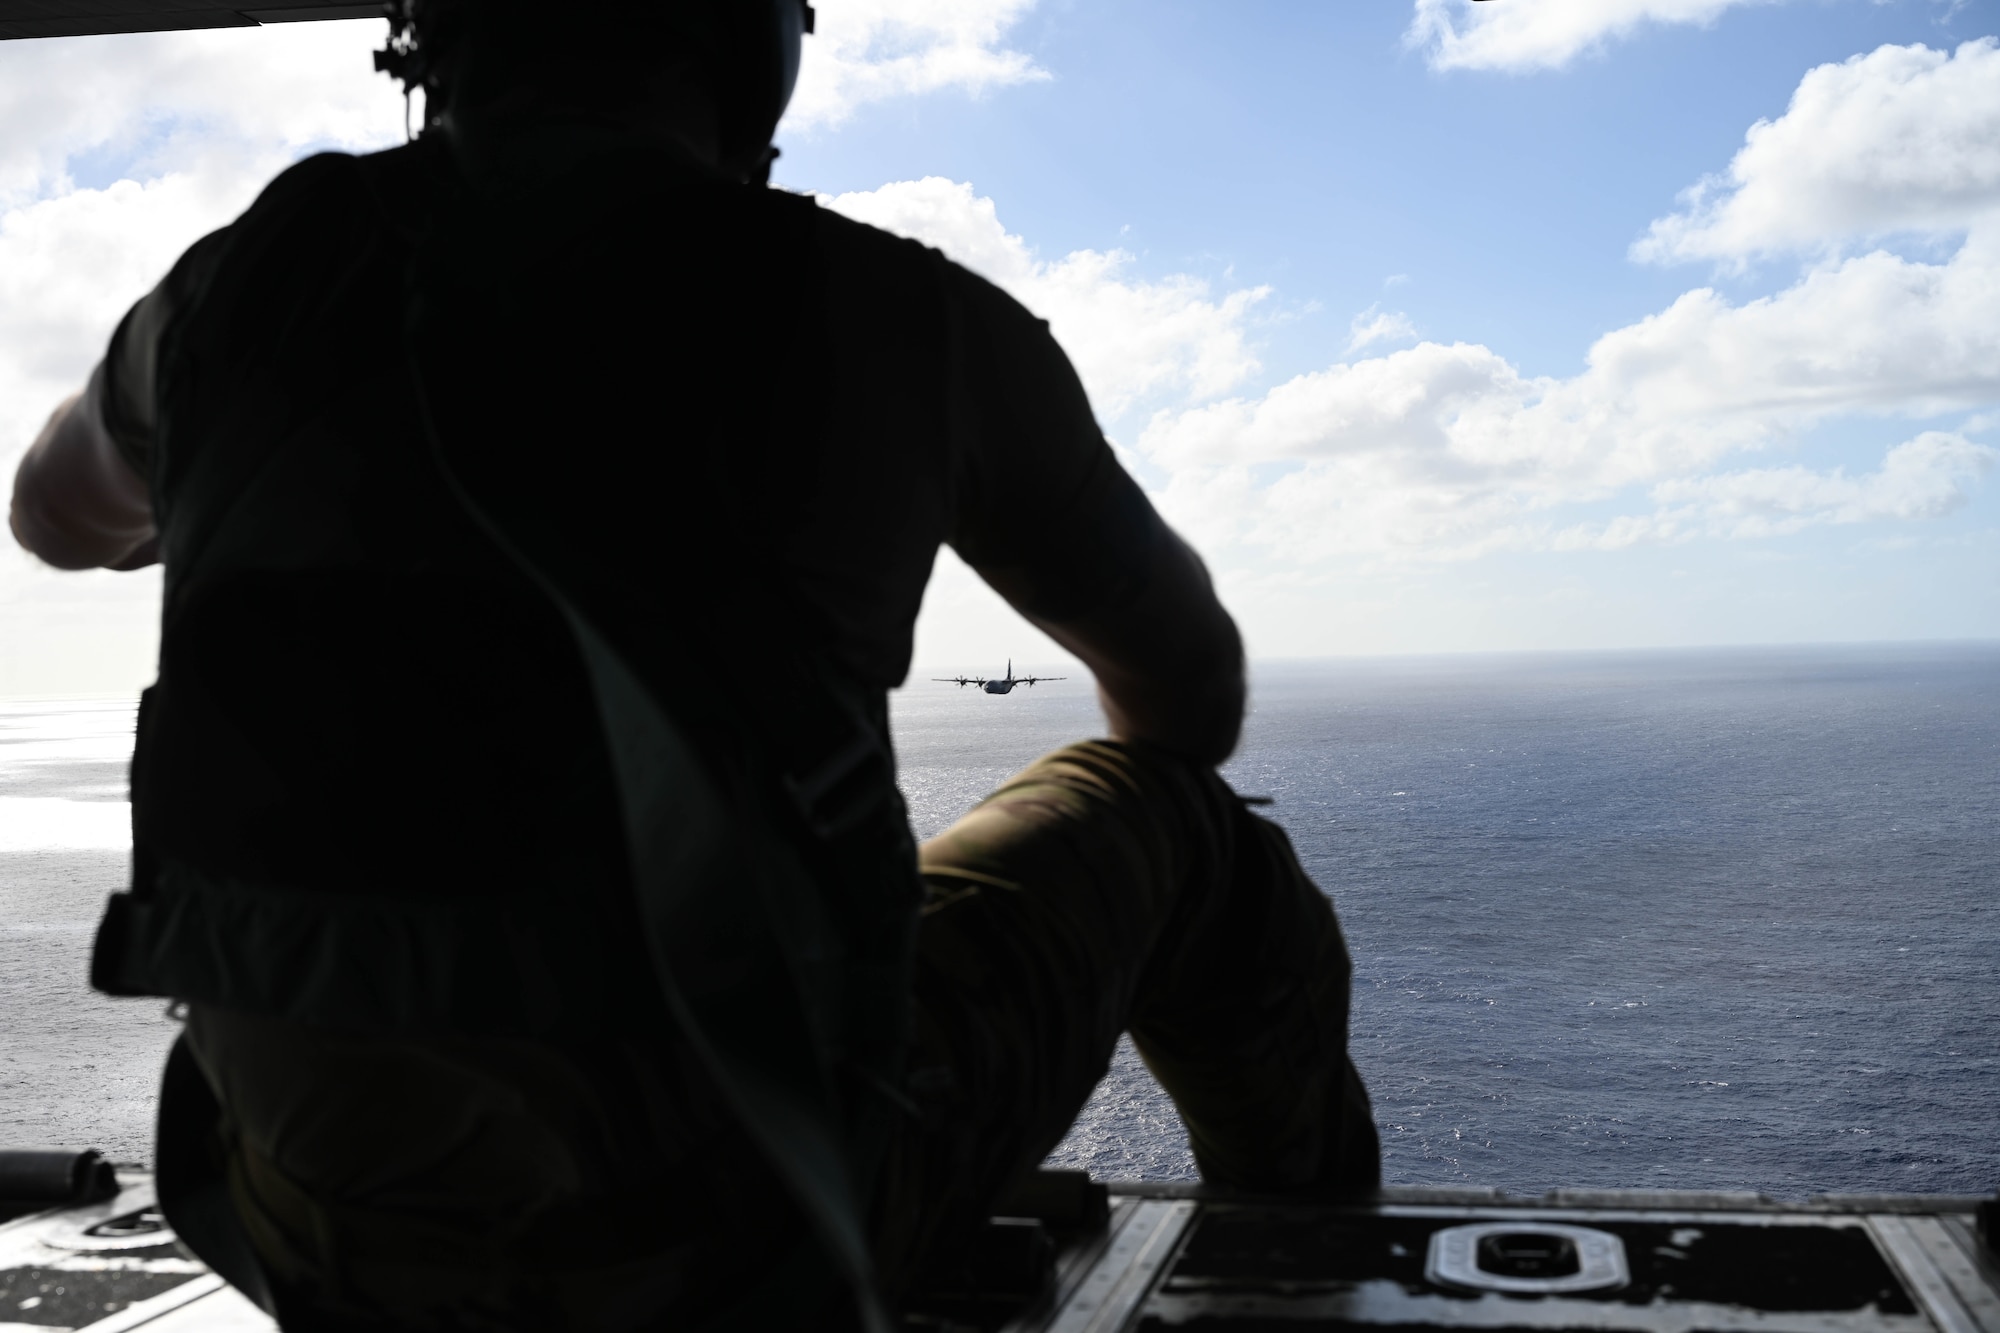 A man in uniform watches a military aircraft fly over the ocean